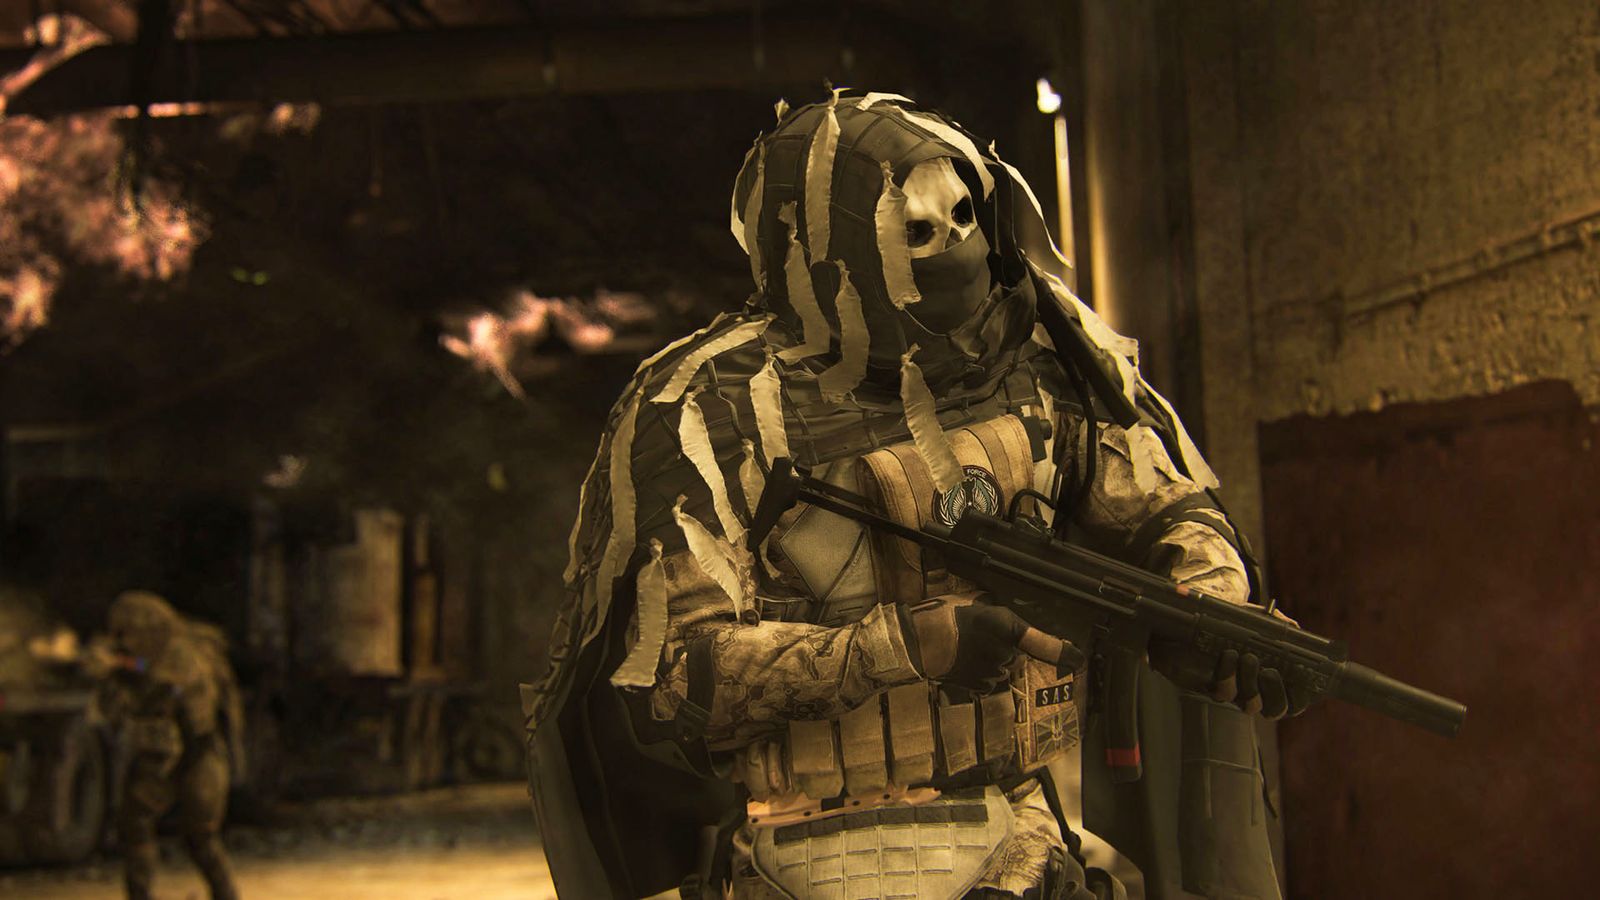 Warzone player holding suppressed SMG and wearing ghillie suit